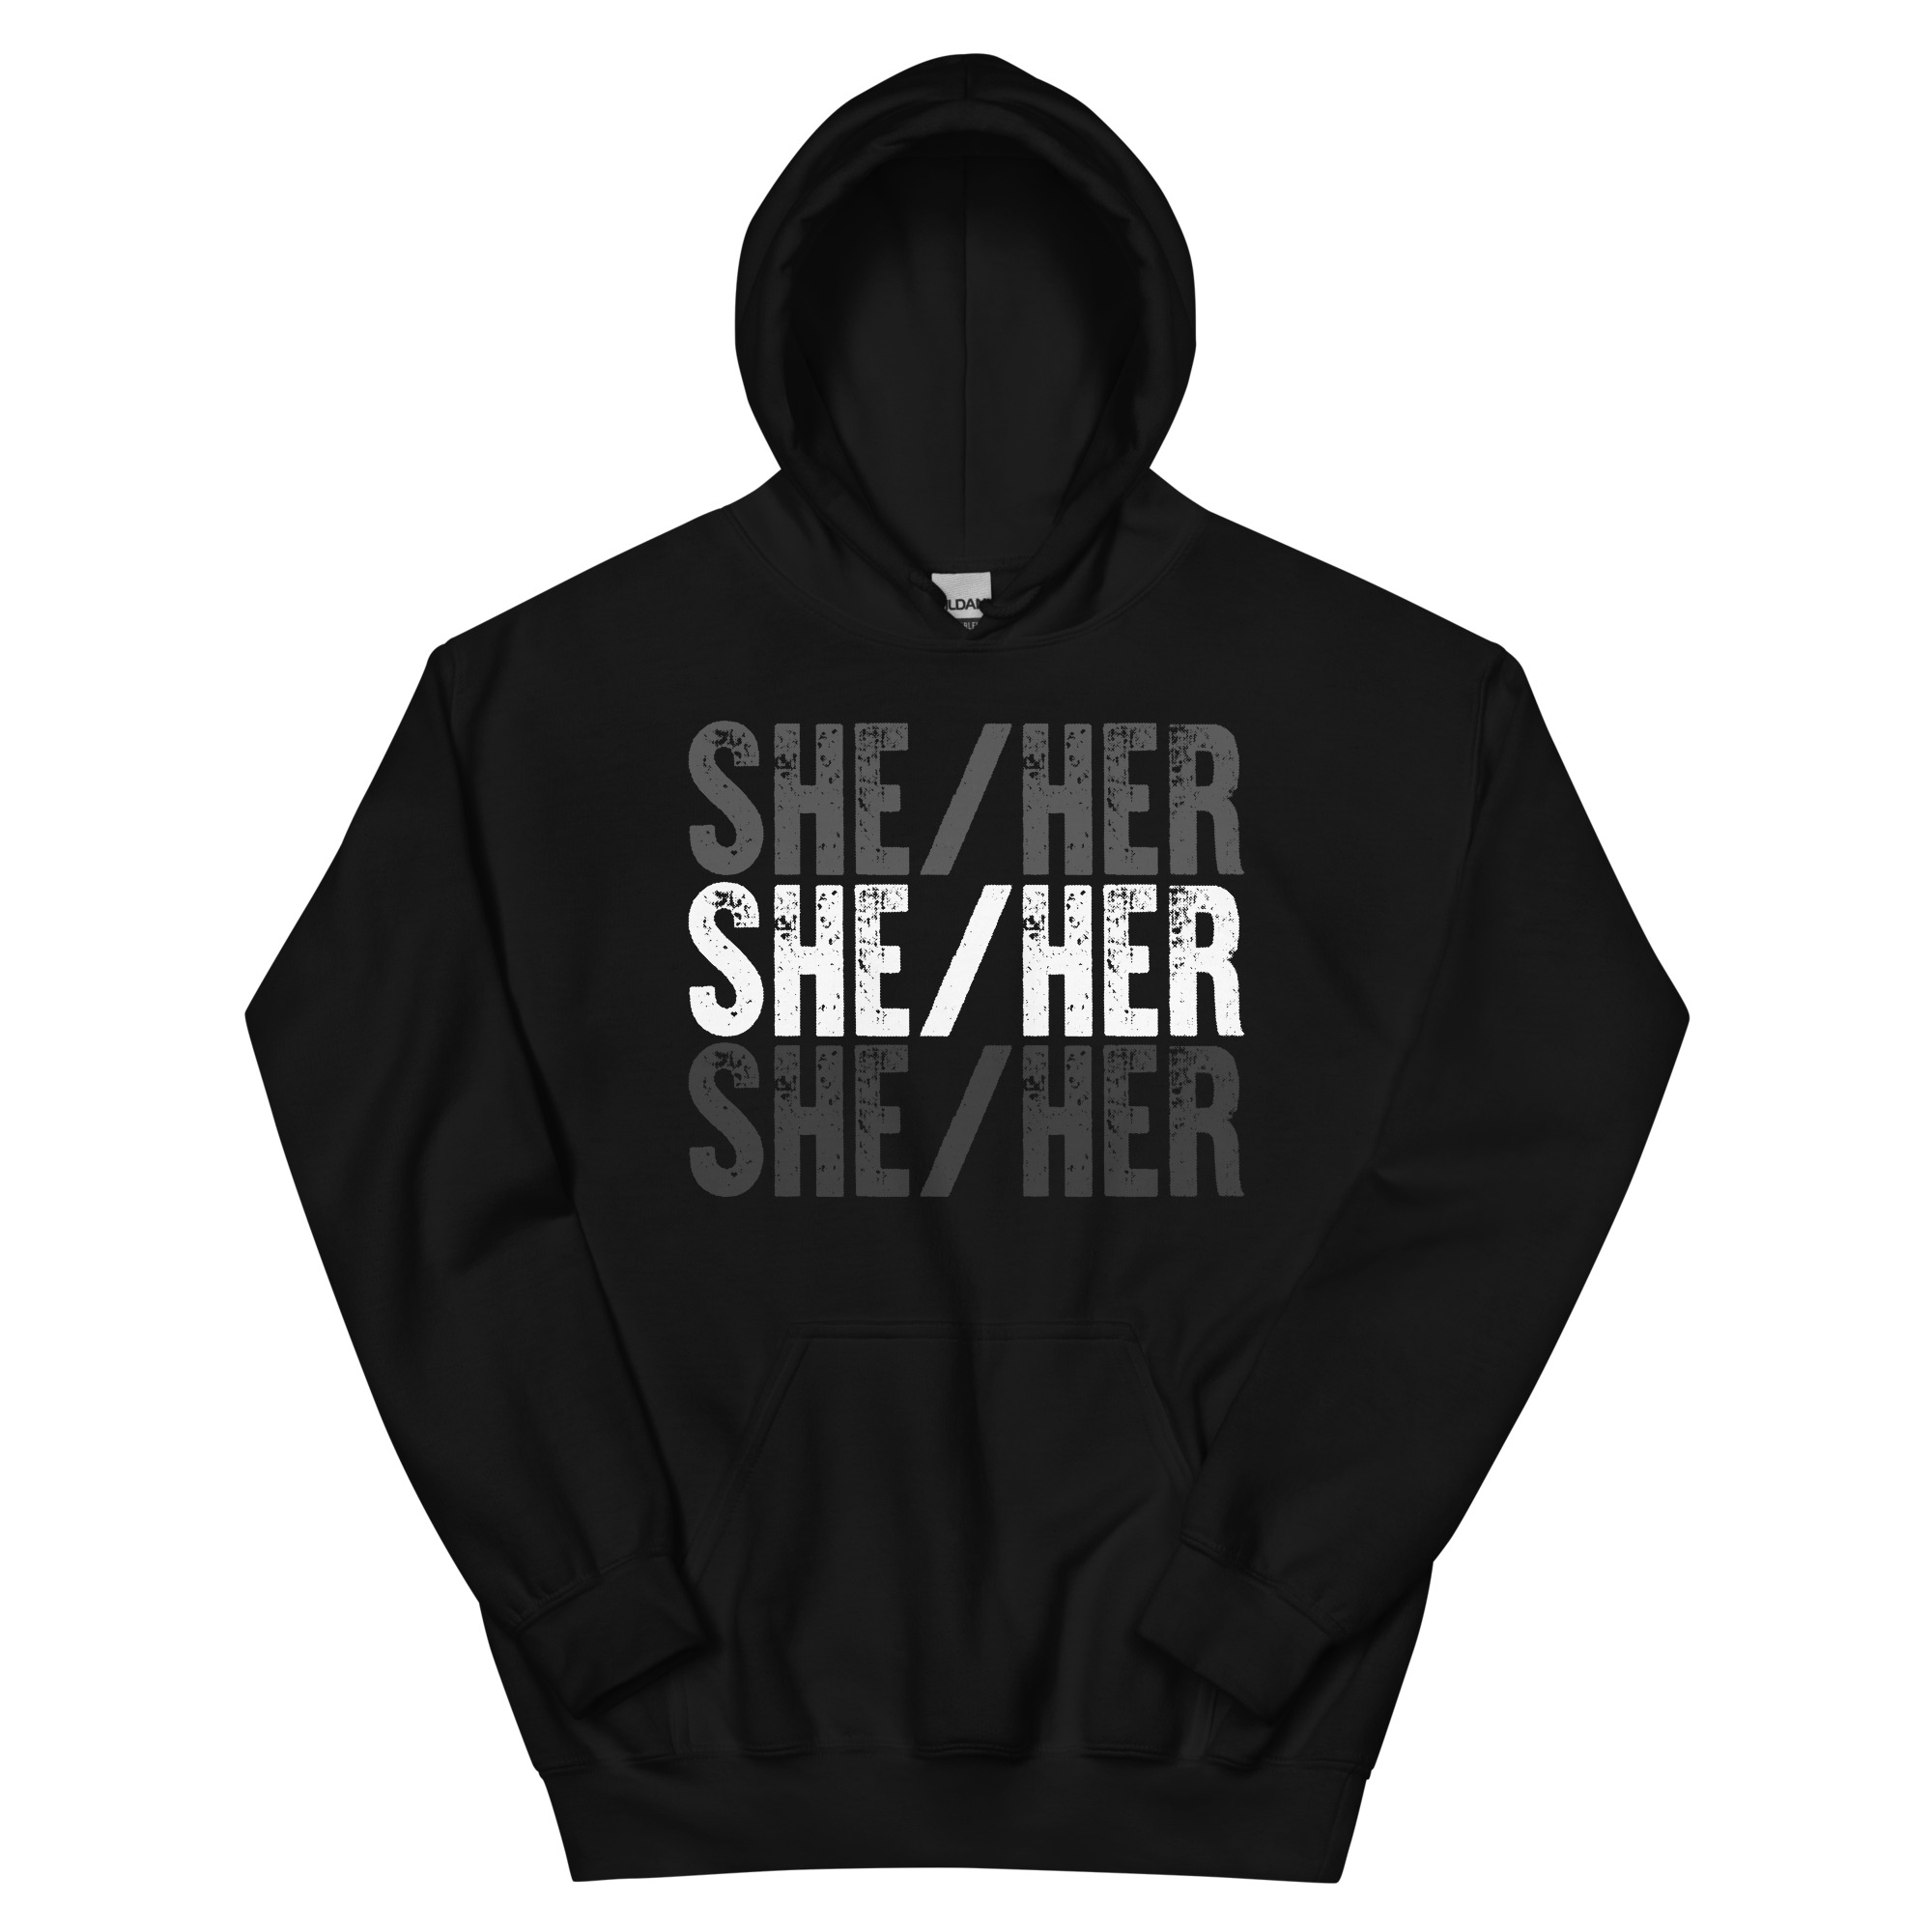 Featured image for “SHE / HER – Unisex Gildan Hoodie”